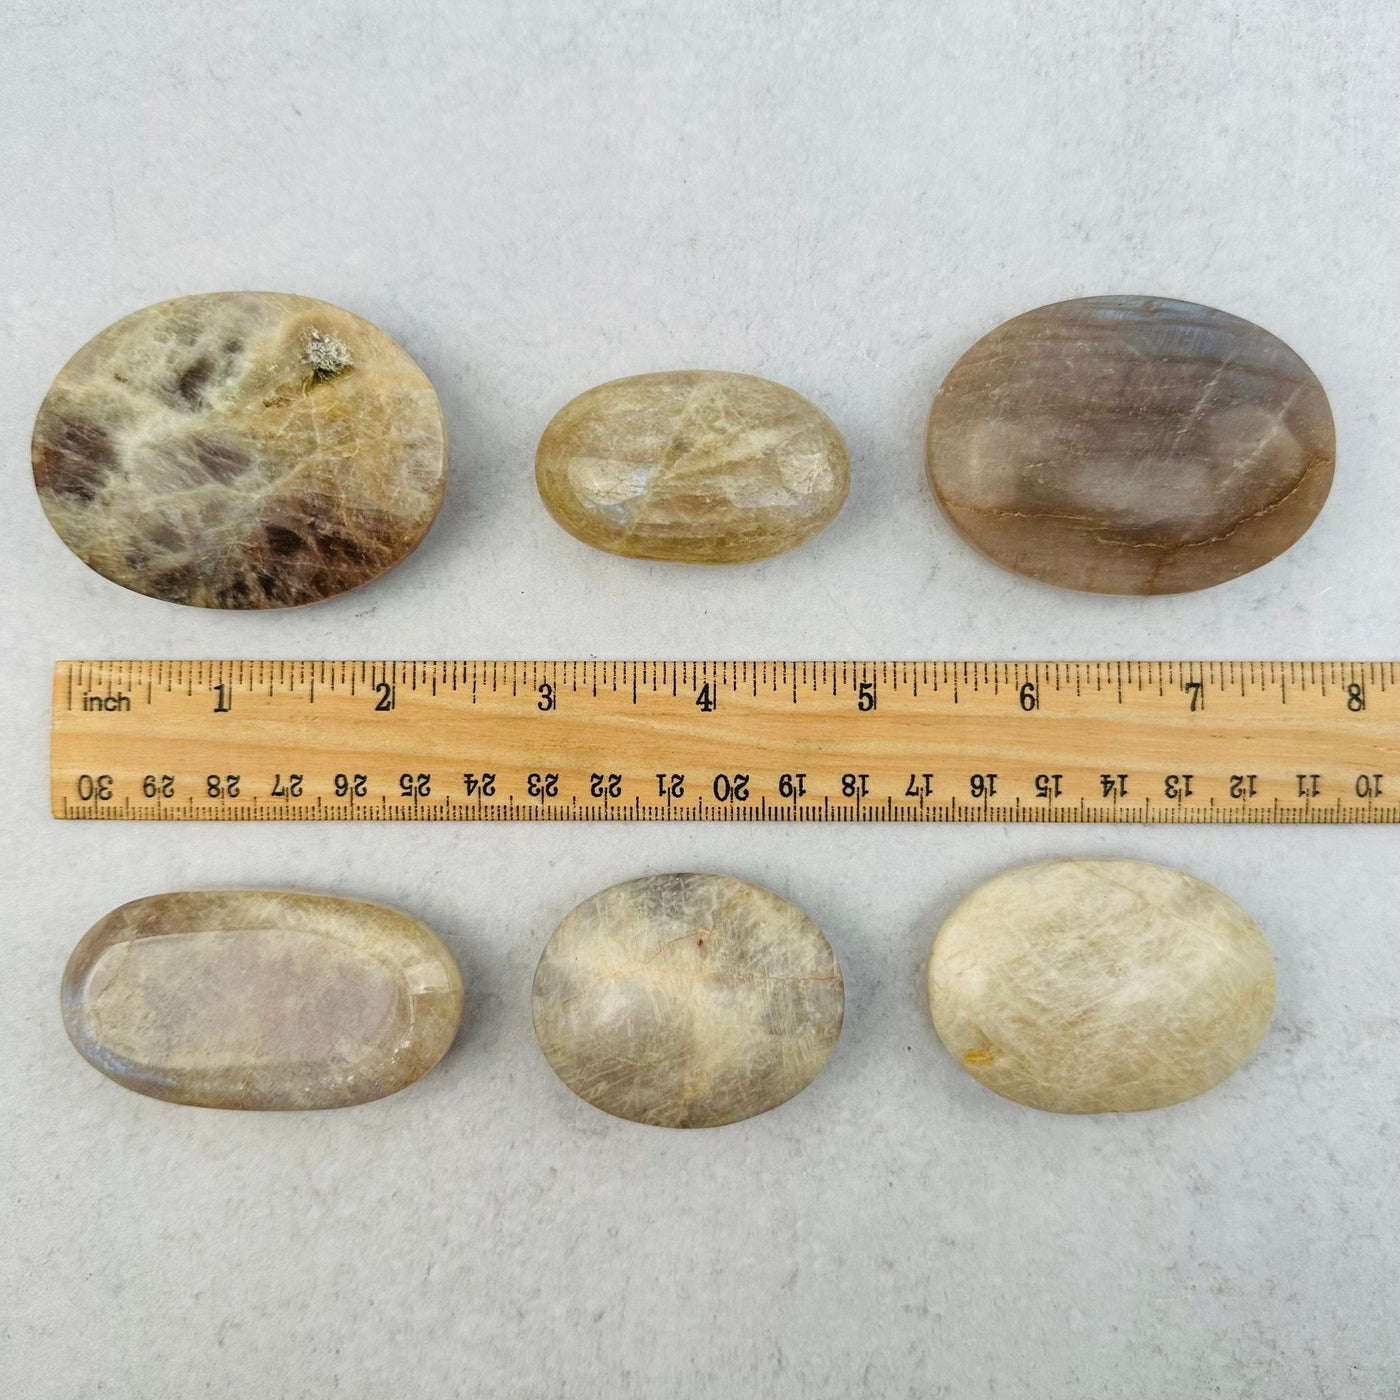 palm stones next to a ruler for size reference 